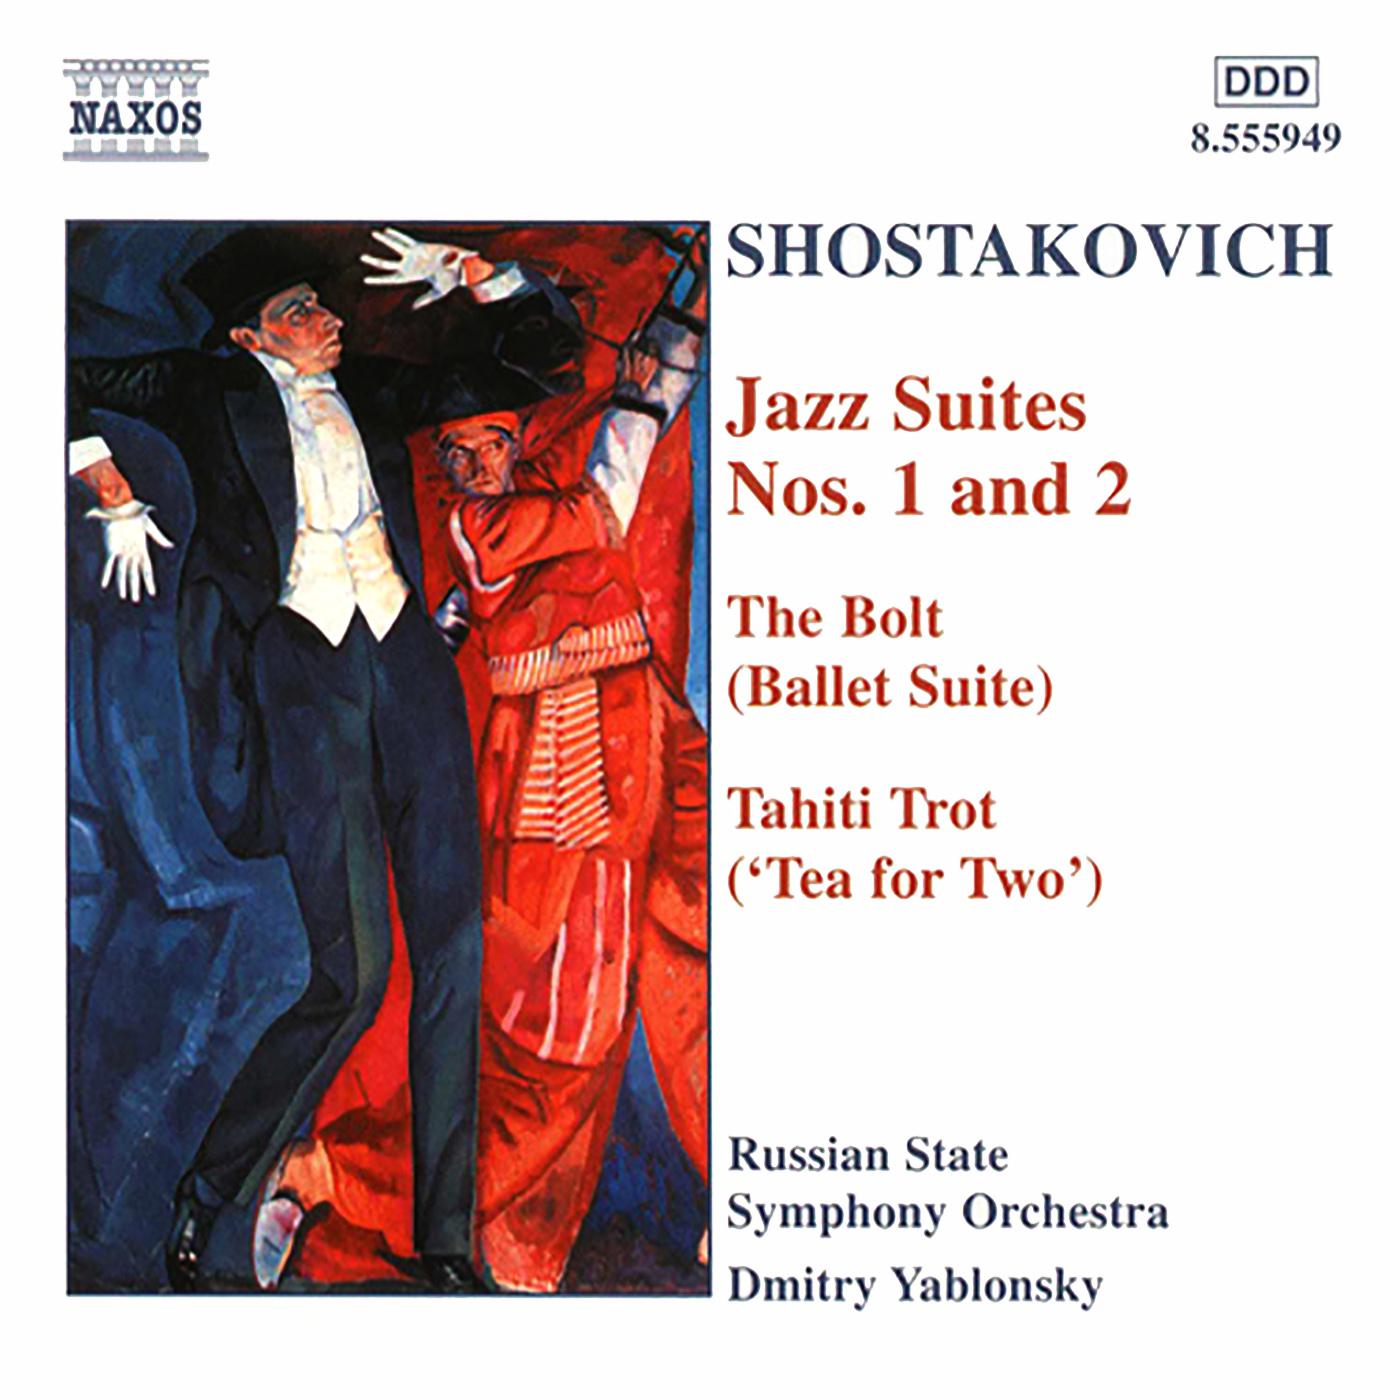 SHOSTAKOVICH, D.: Jazz Suites Nos. 1 and 2 / The Bolt Suite / Tahiti Trot (Russian State Symphony Orchestra, D. Yablonsky)